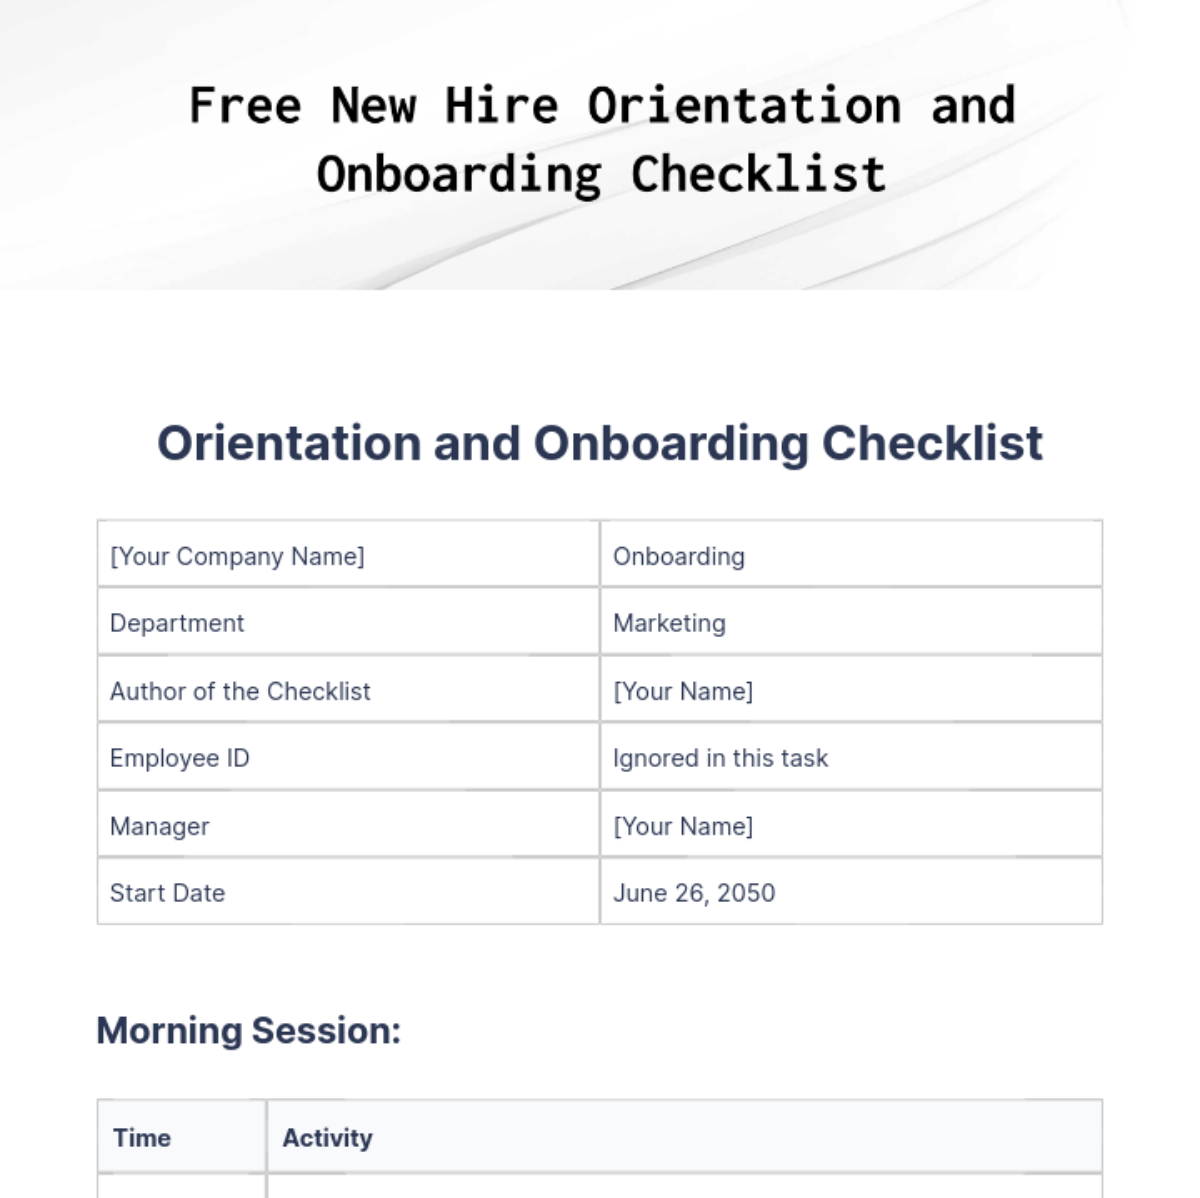 New Hire Orientation and Onboarding Checklist Template